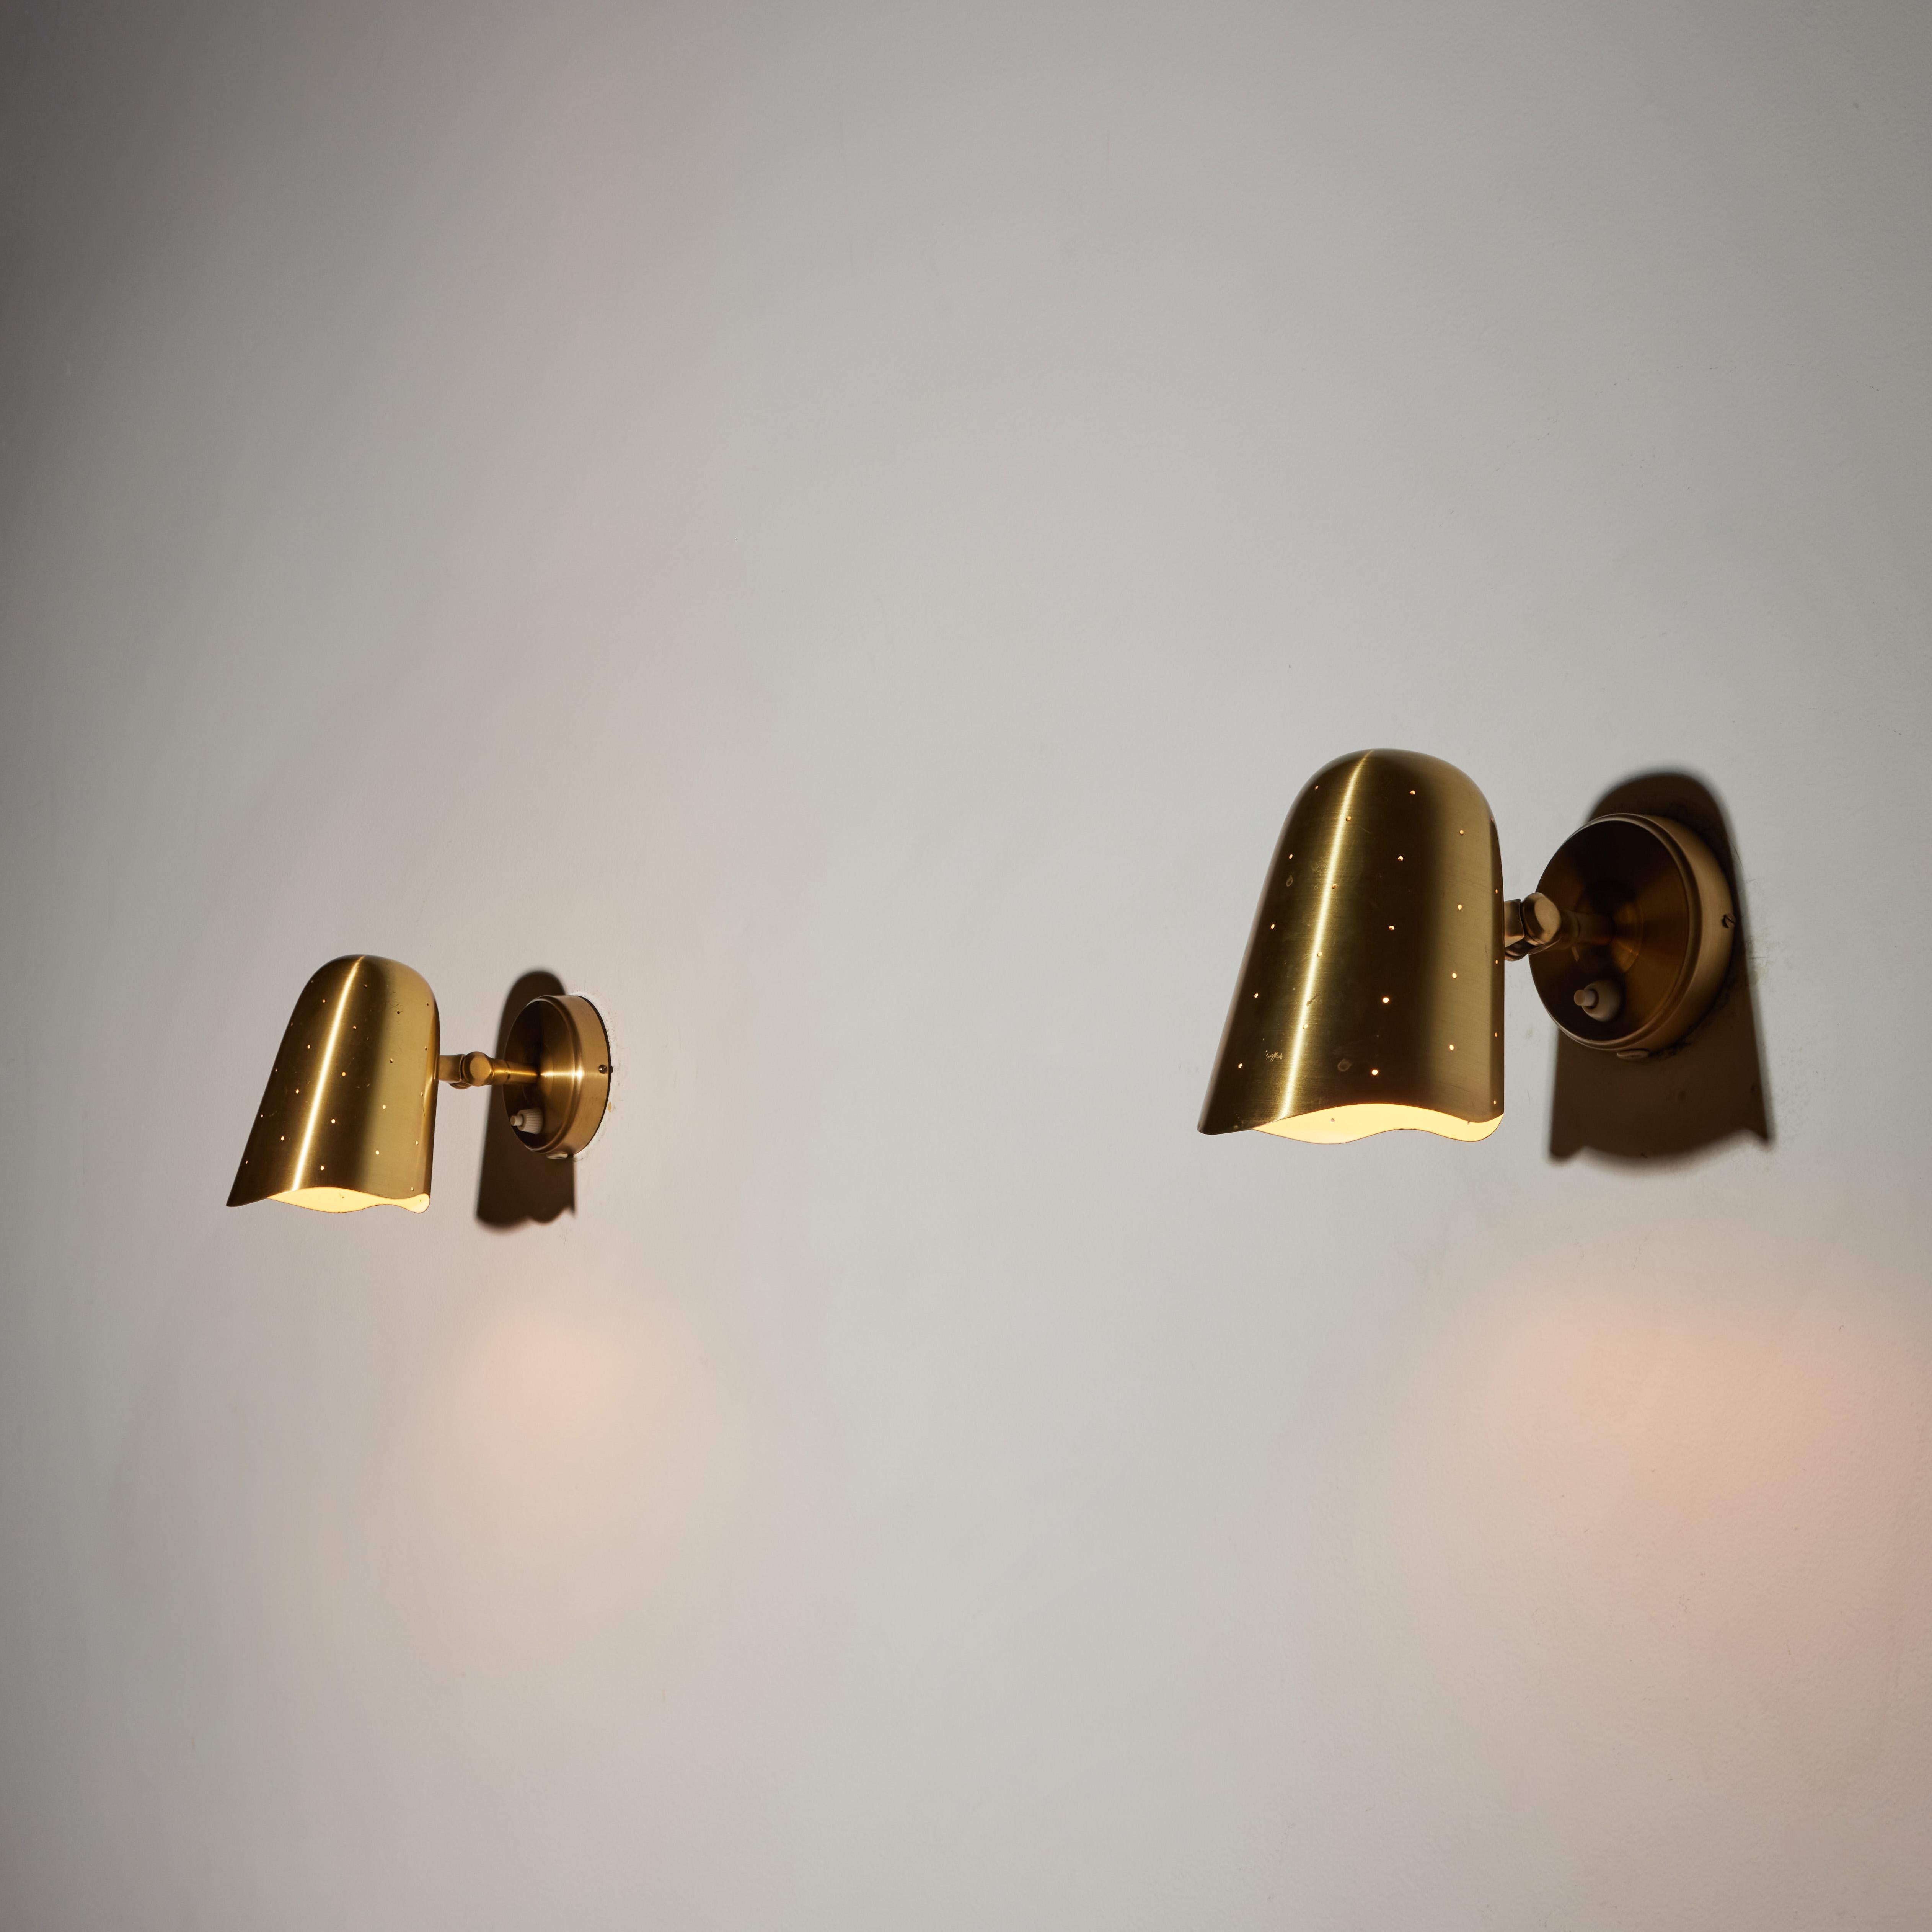 Pair of sconces by Boréns Borås. Manufactured in Sweden, circa 1950's. Brass shades articulate to various positions. Rewired for U.S. standards. We recommend one E27 75w maximum bulb per fixture. Bulbs not provided.